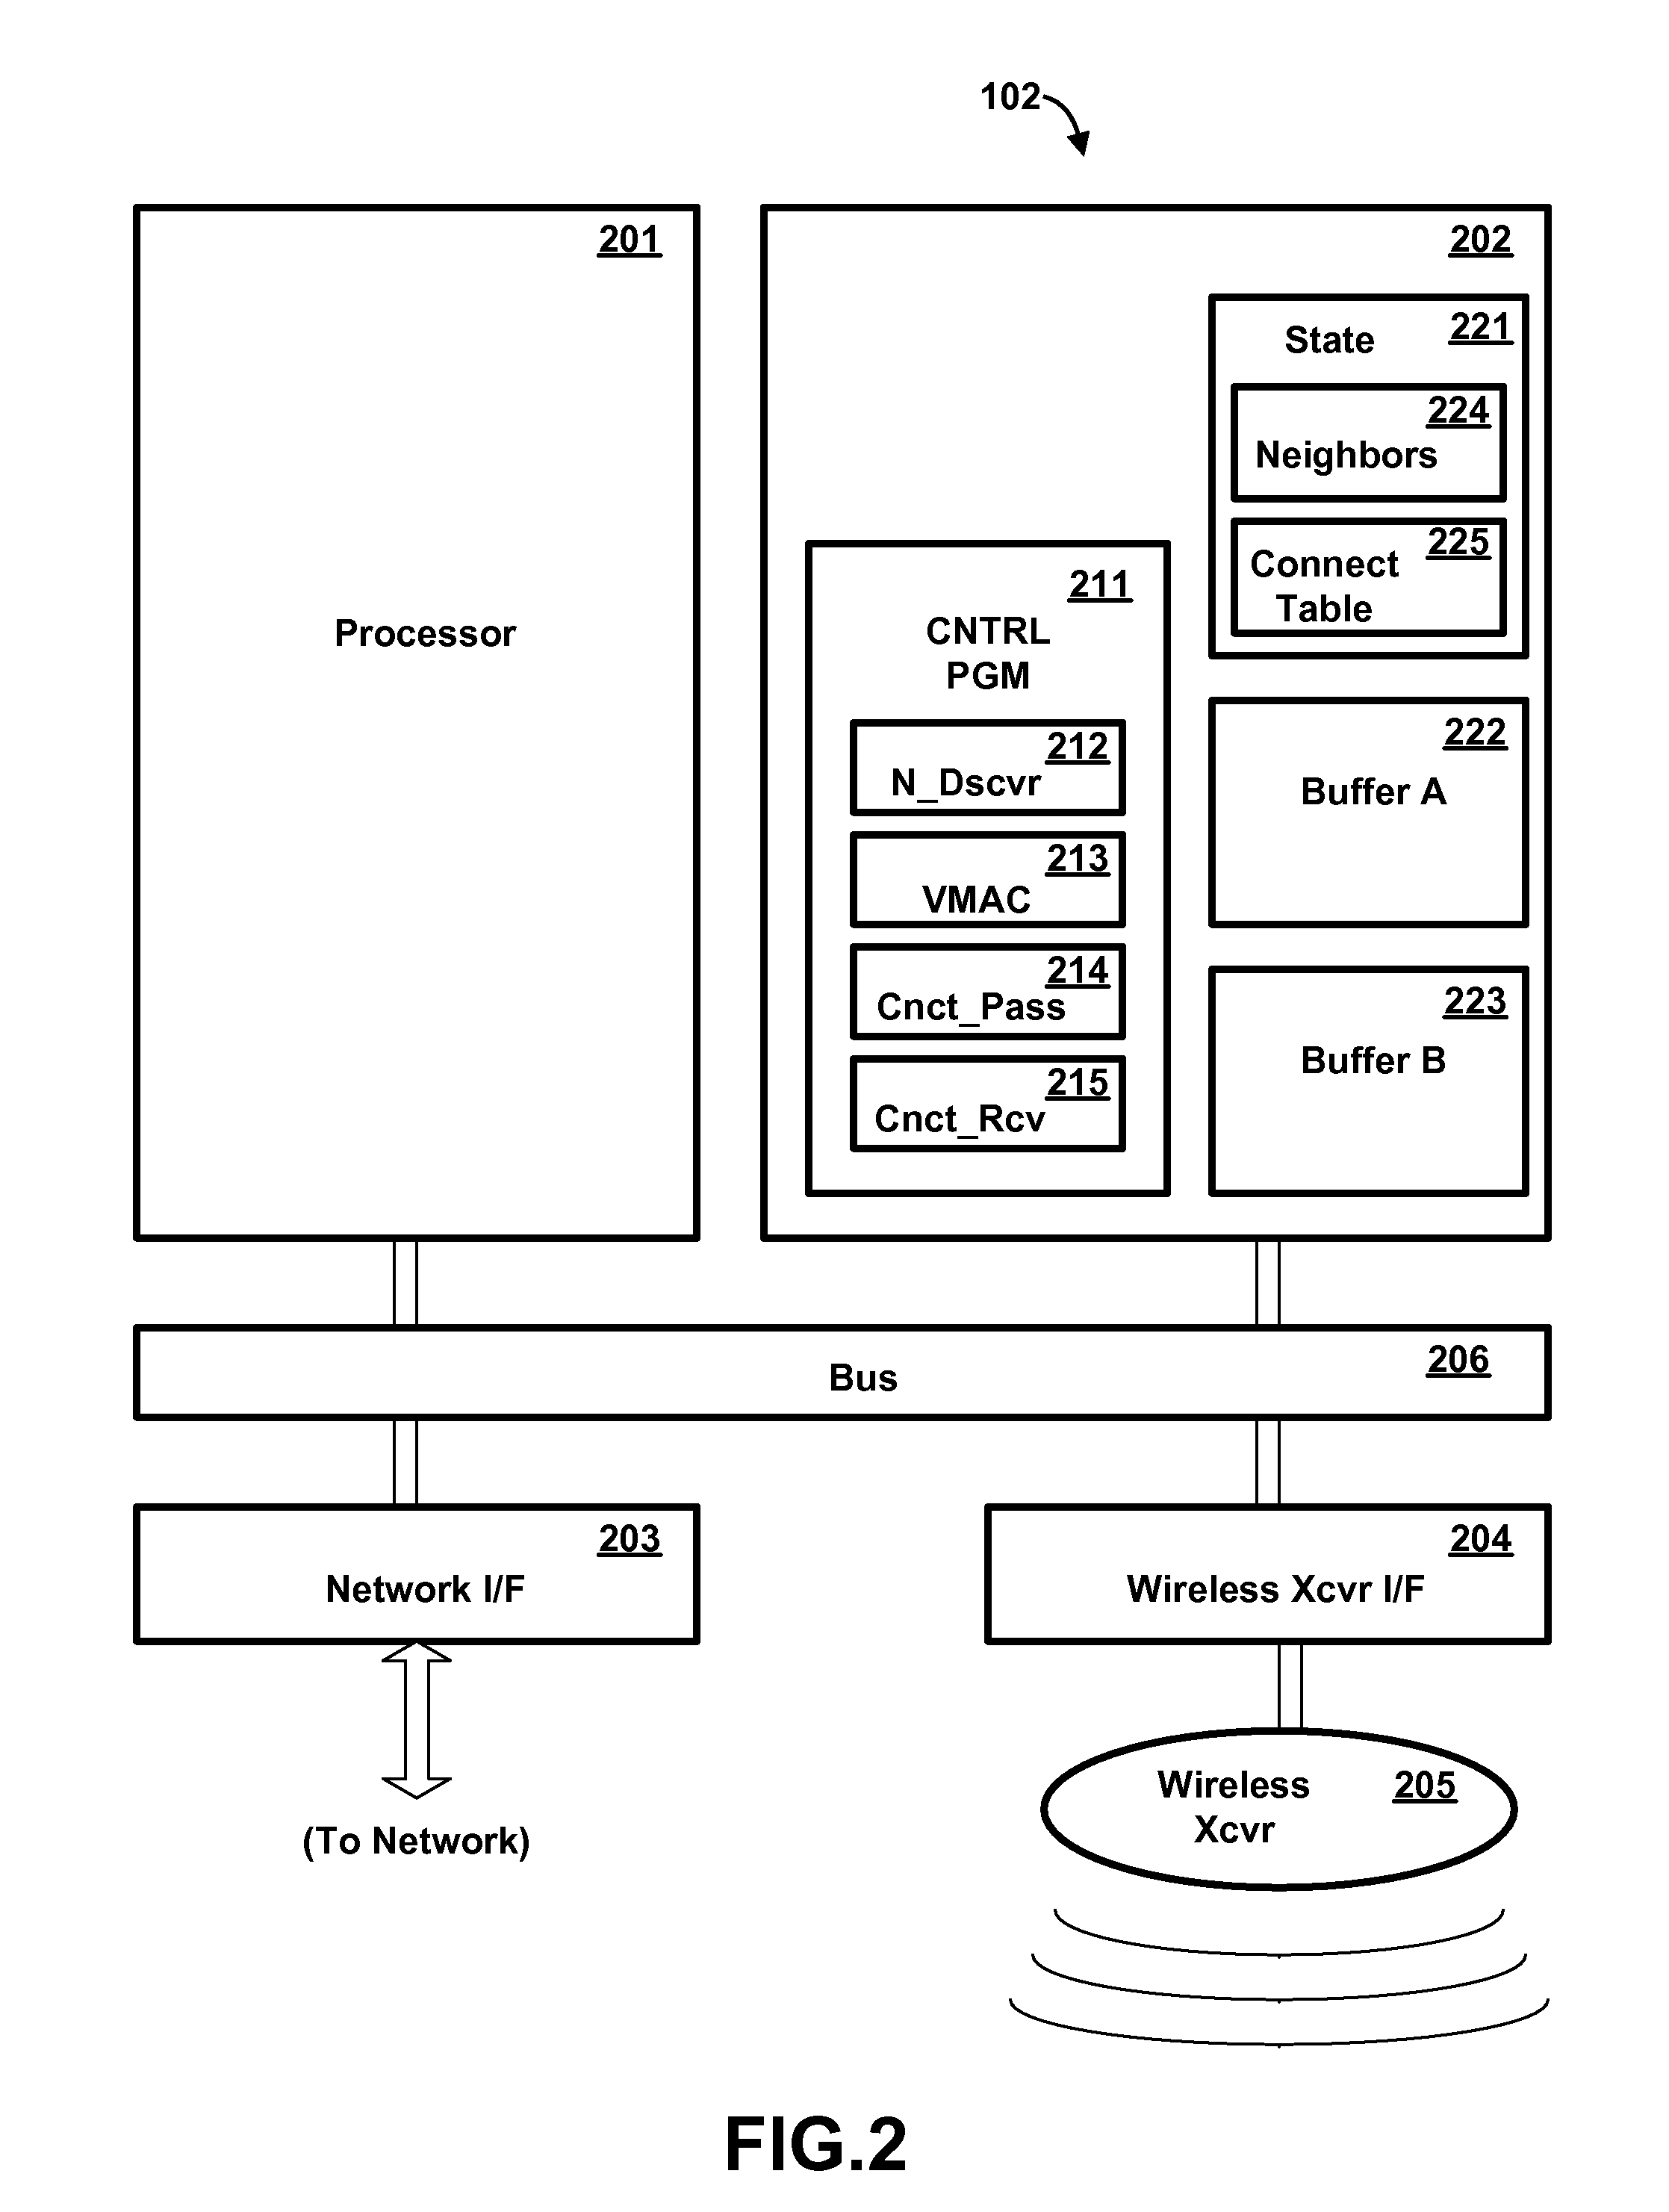 Method and Apparatus for Maintaining Communications Connections Over a Distributed Wireless Network